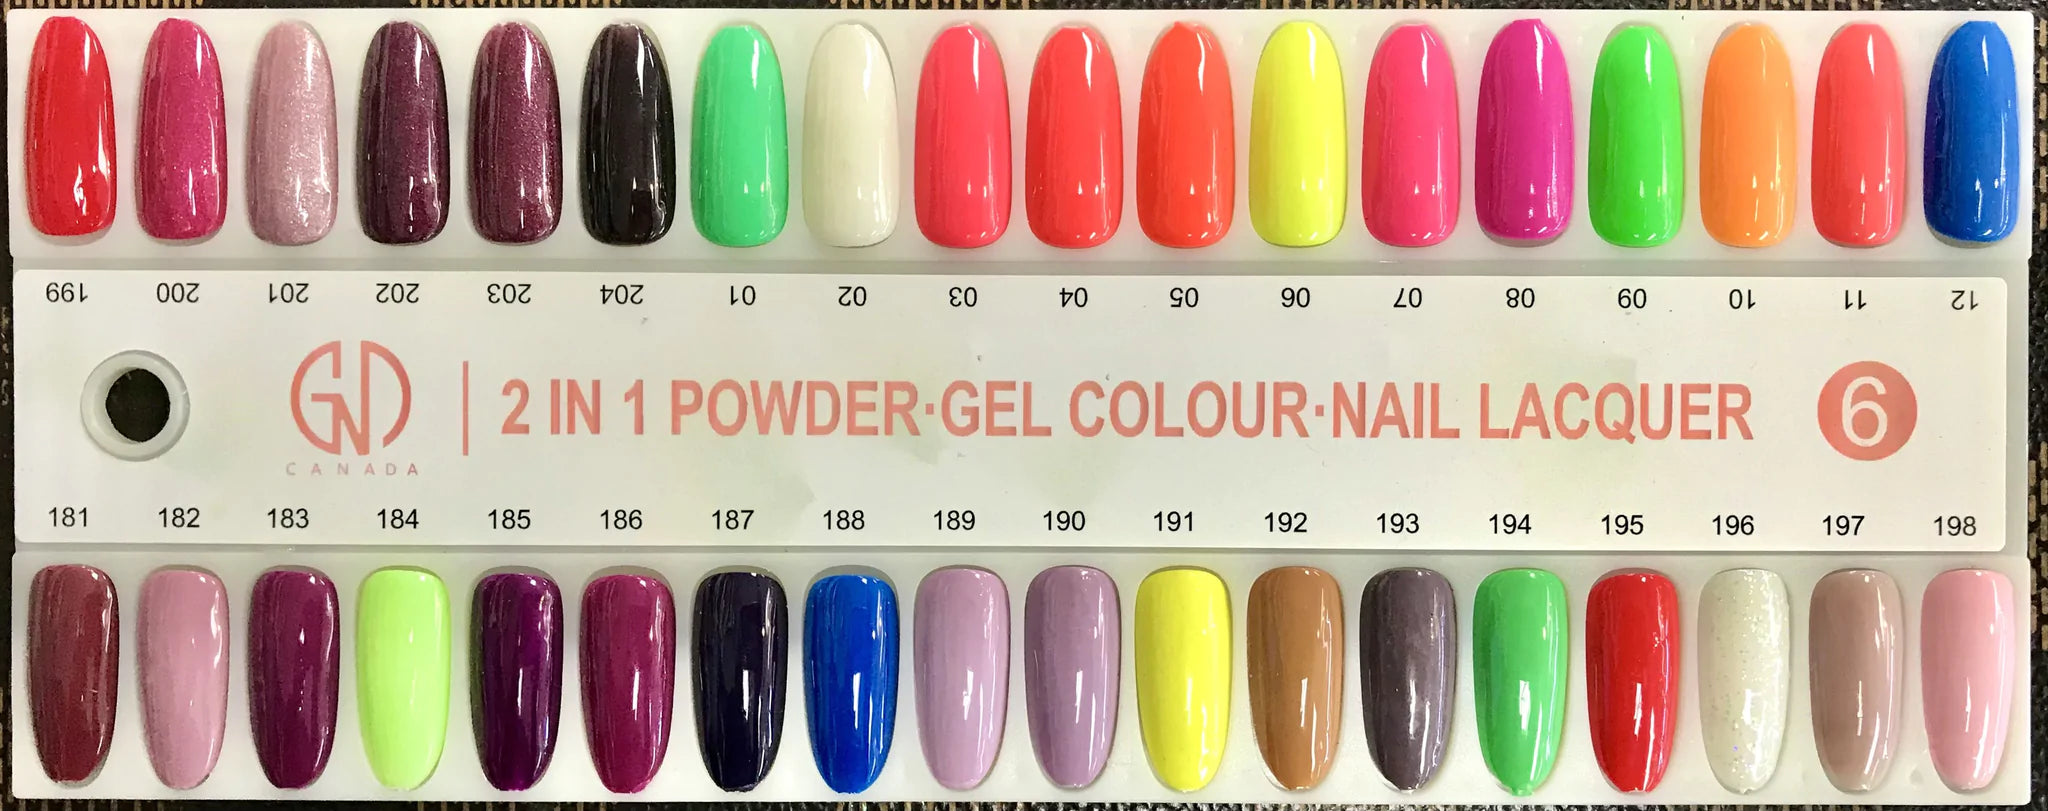 GND Duo Gel & Lacquer 185